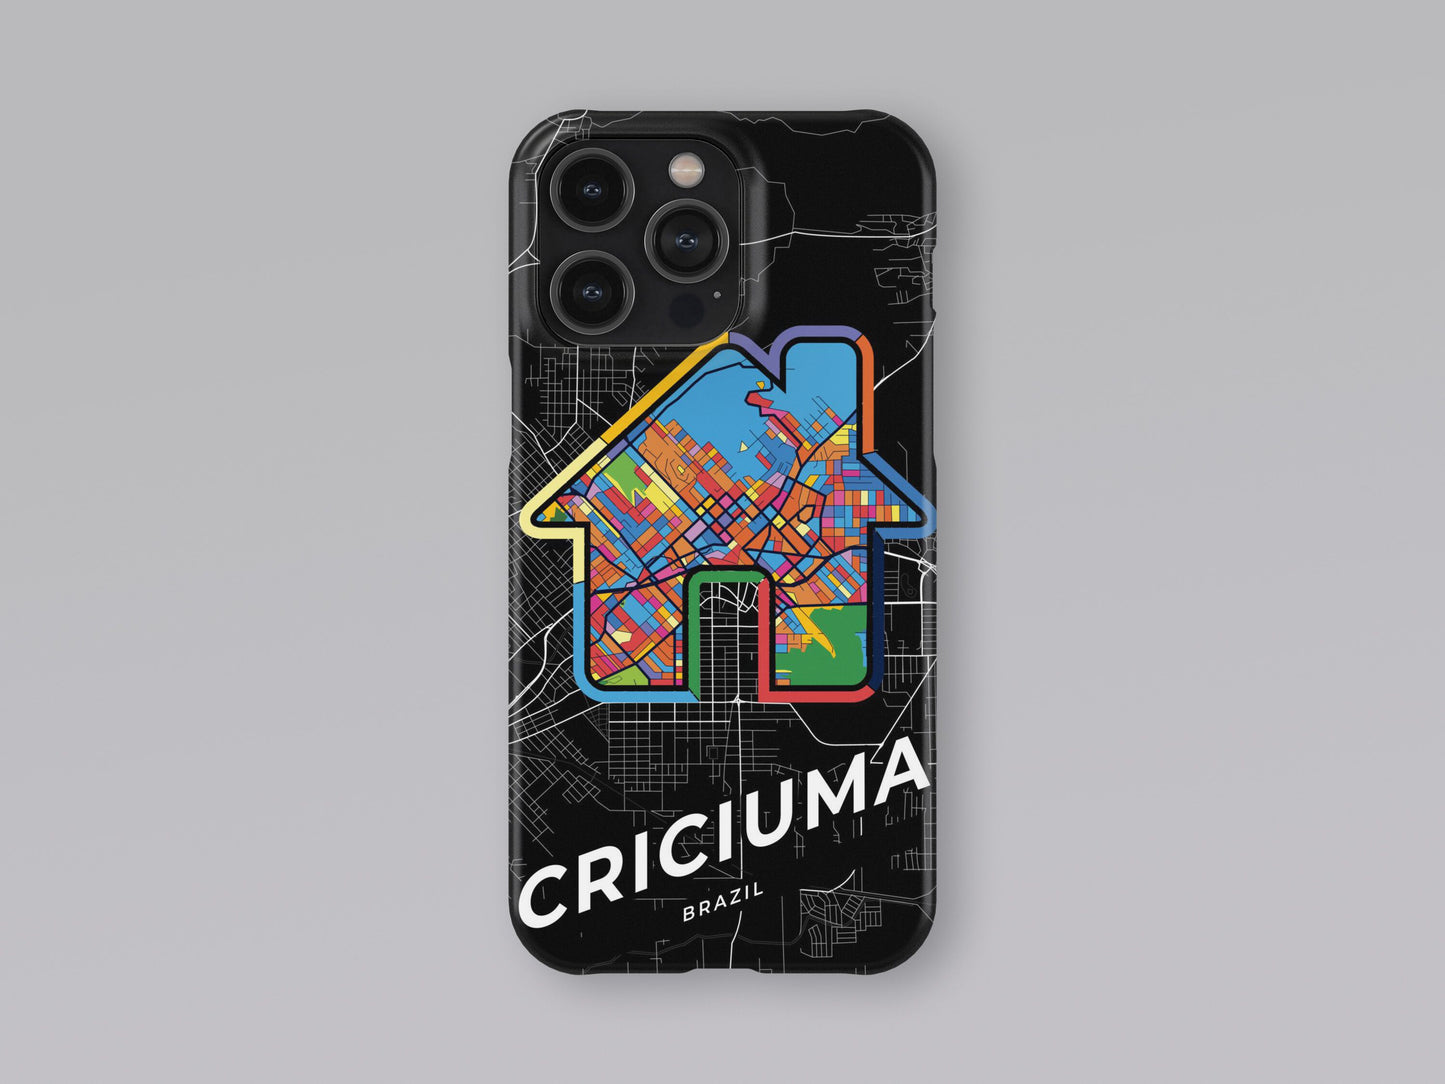 Criciuma Brazil slim phone case with colorful icon. Birthday, wedding or housewarming gift. Couple match cases. 3